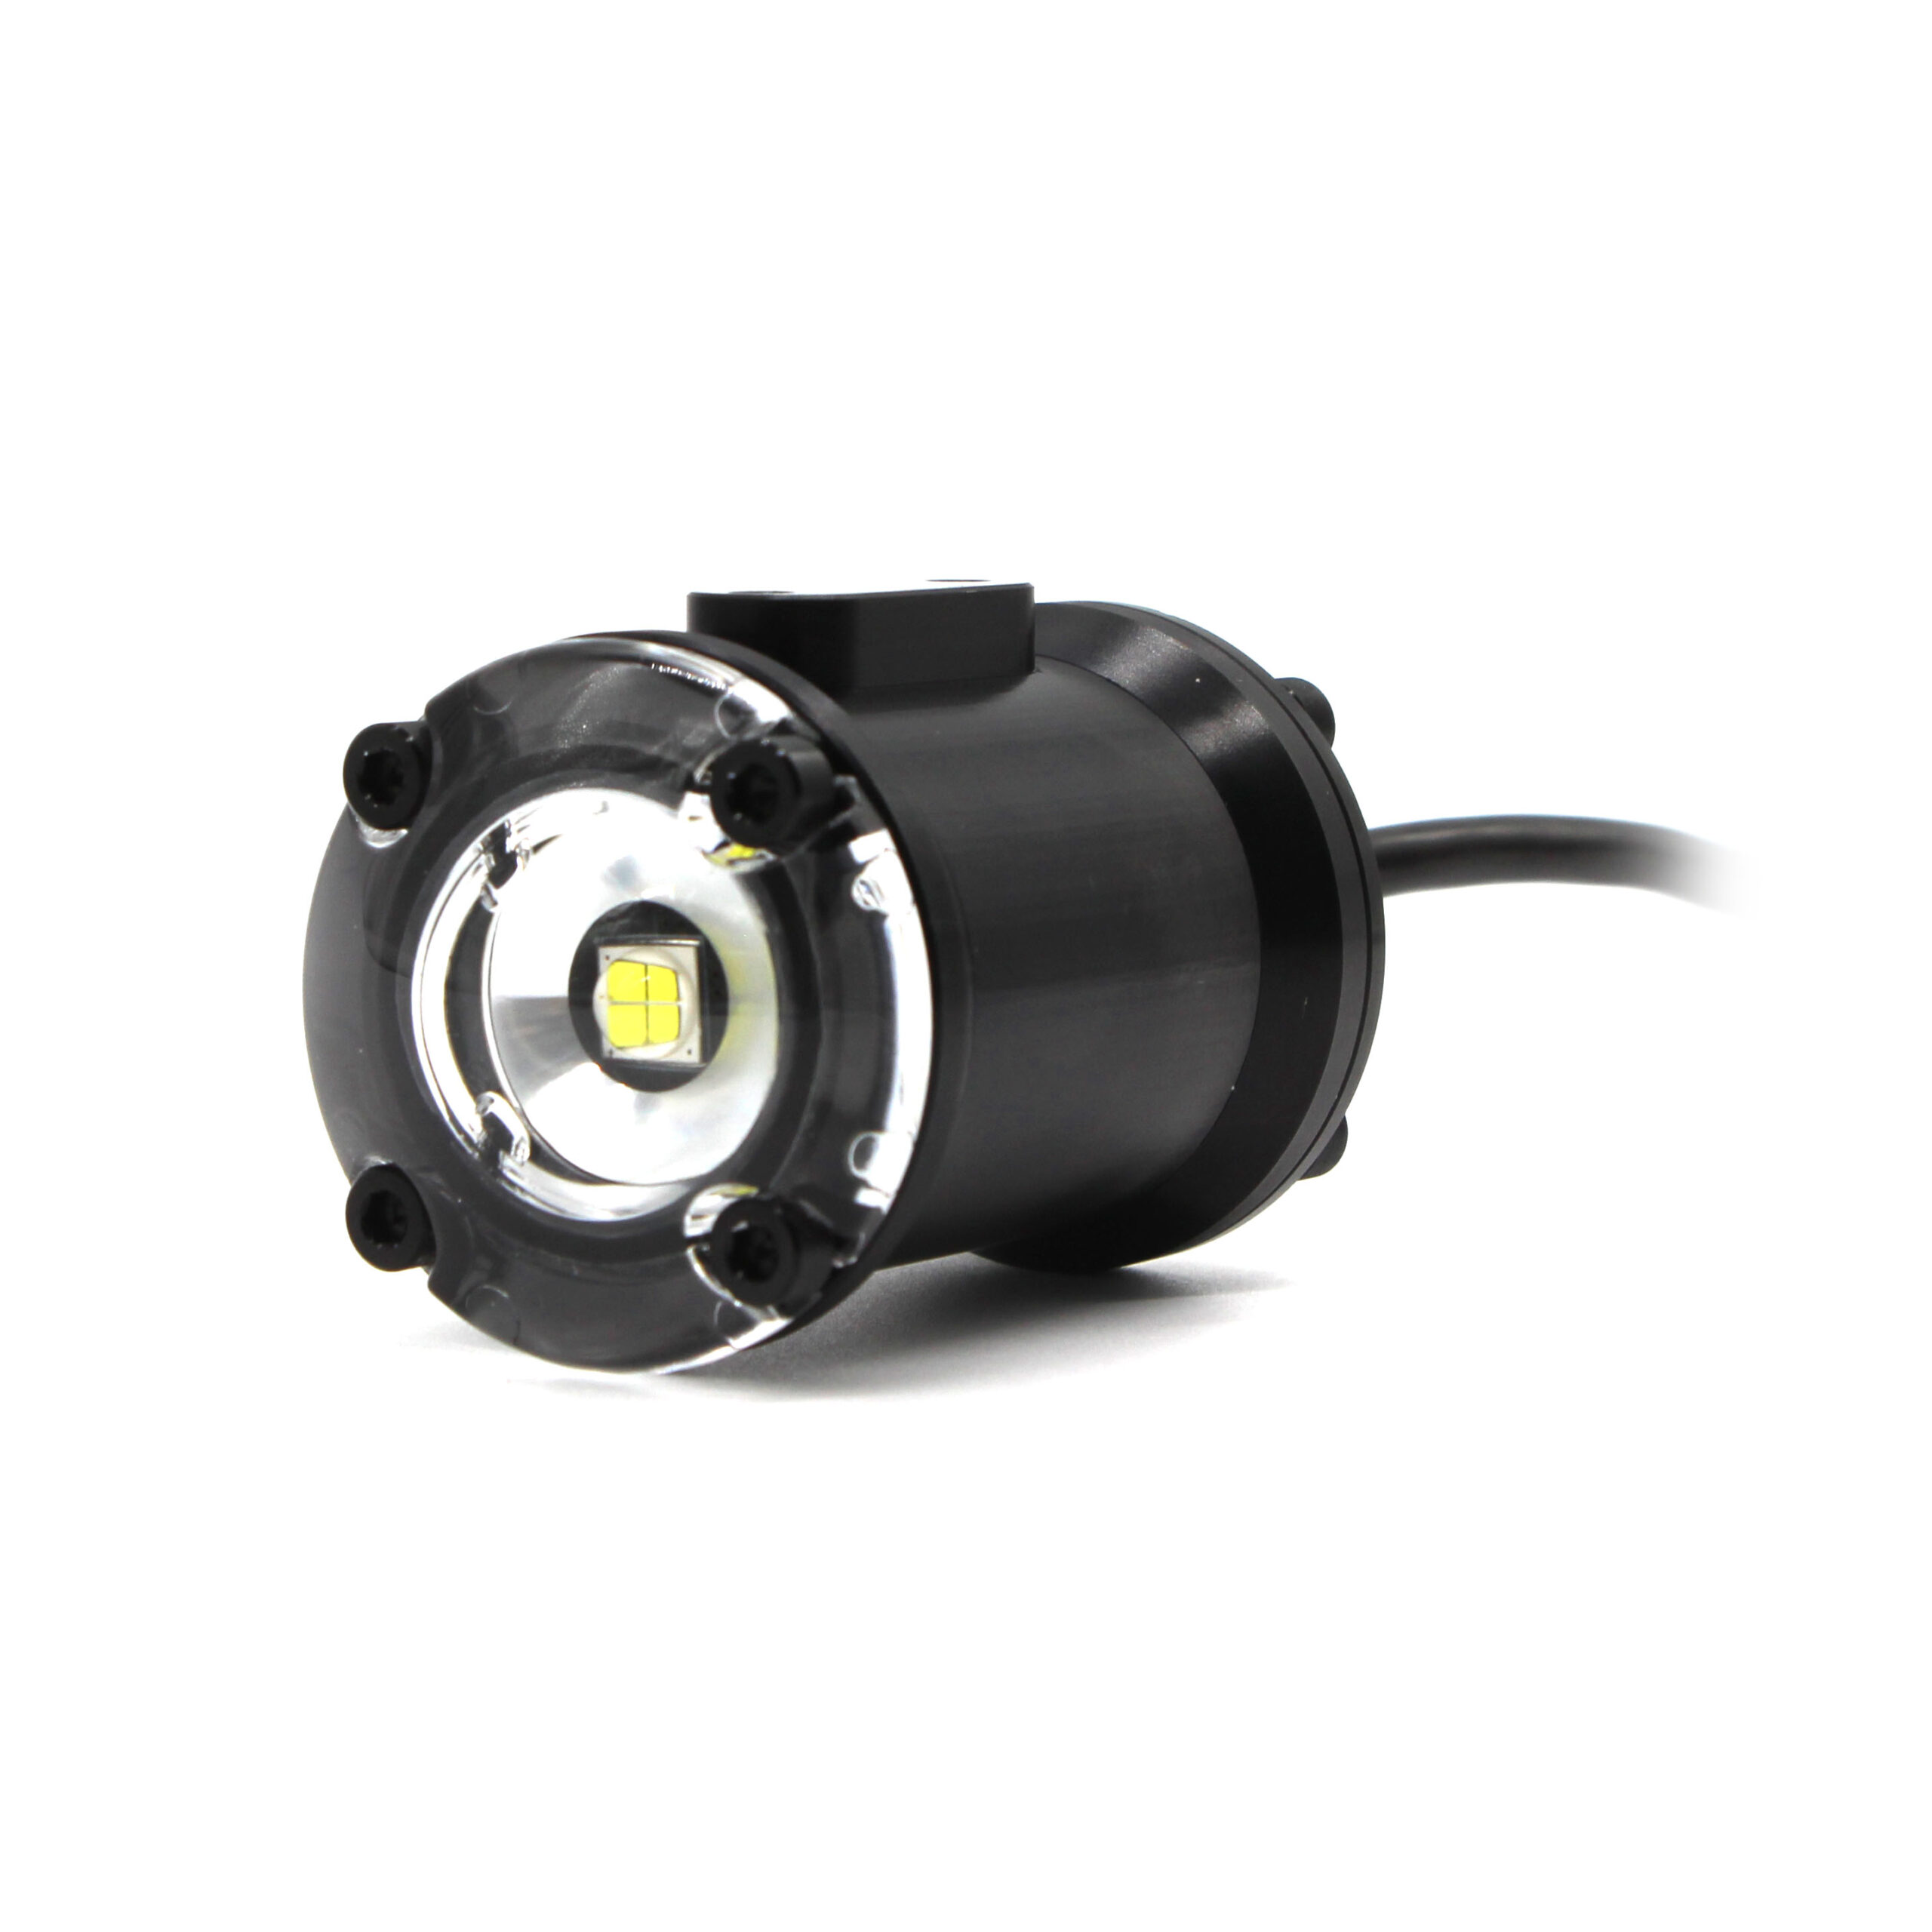 Underwater light ROVs, AUVs, and other applications